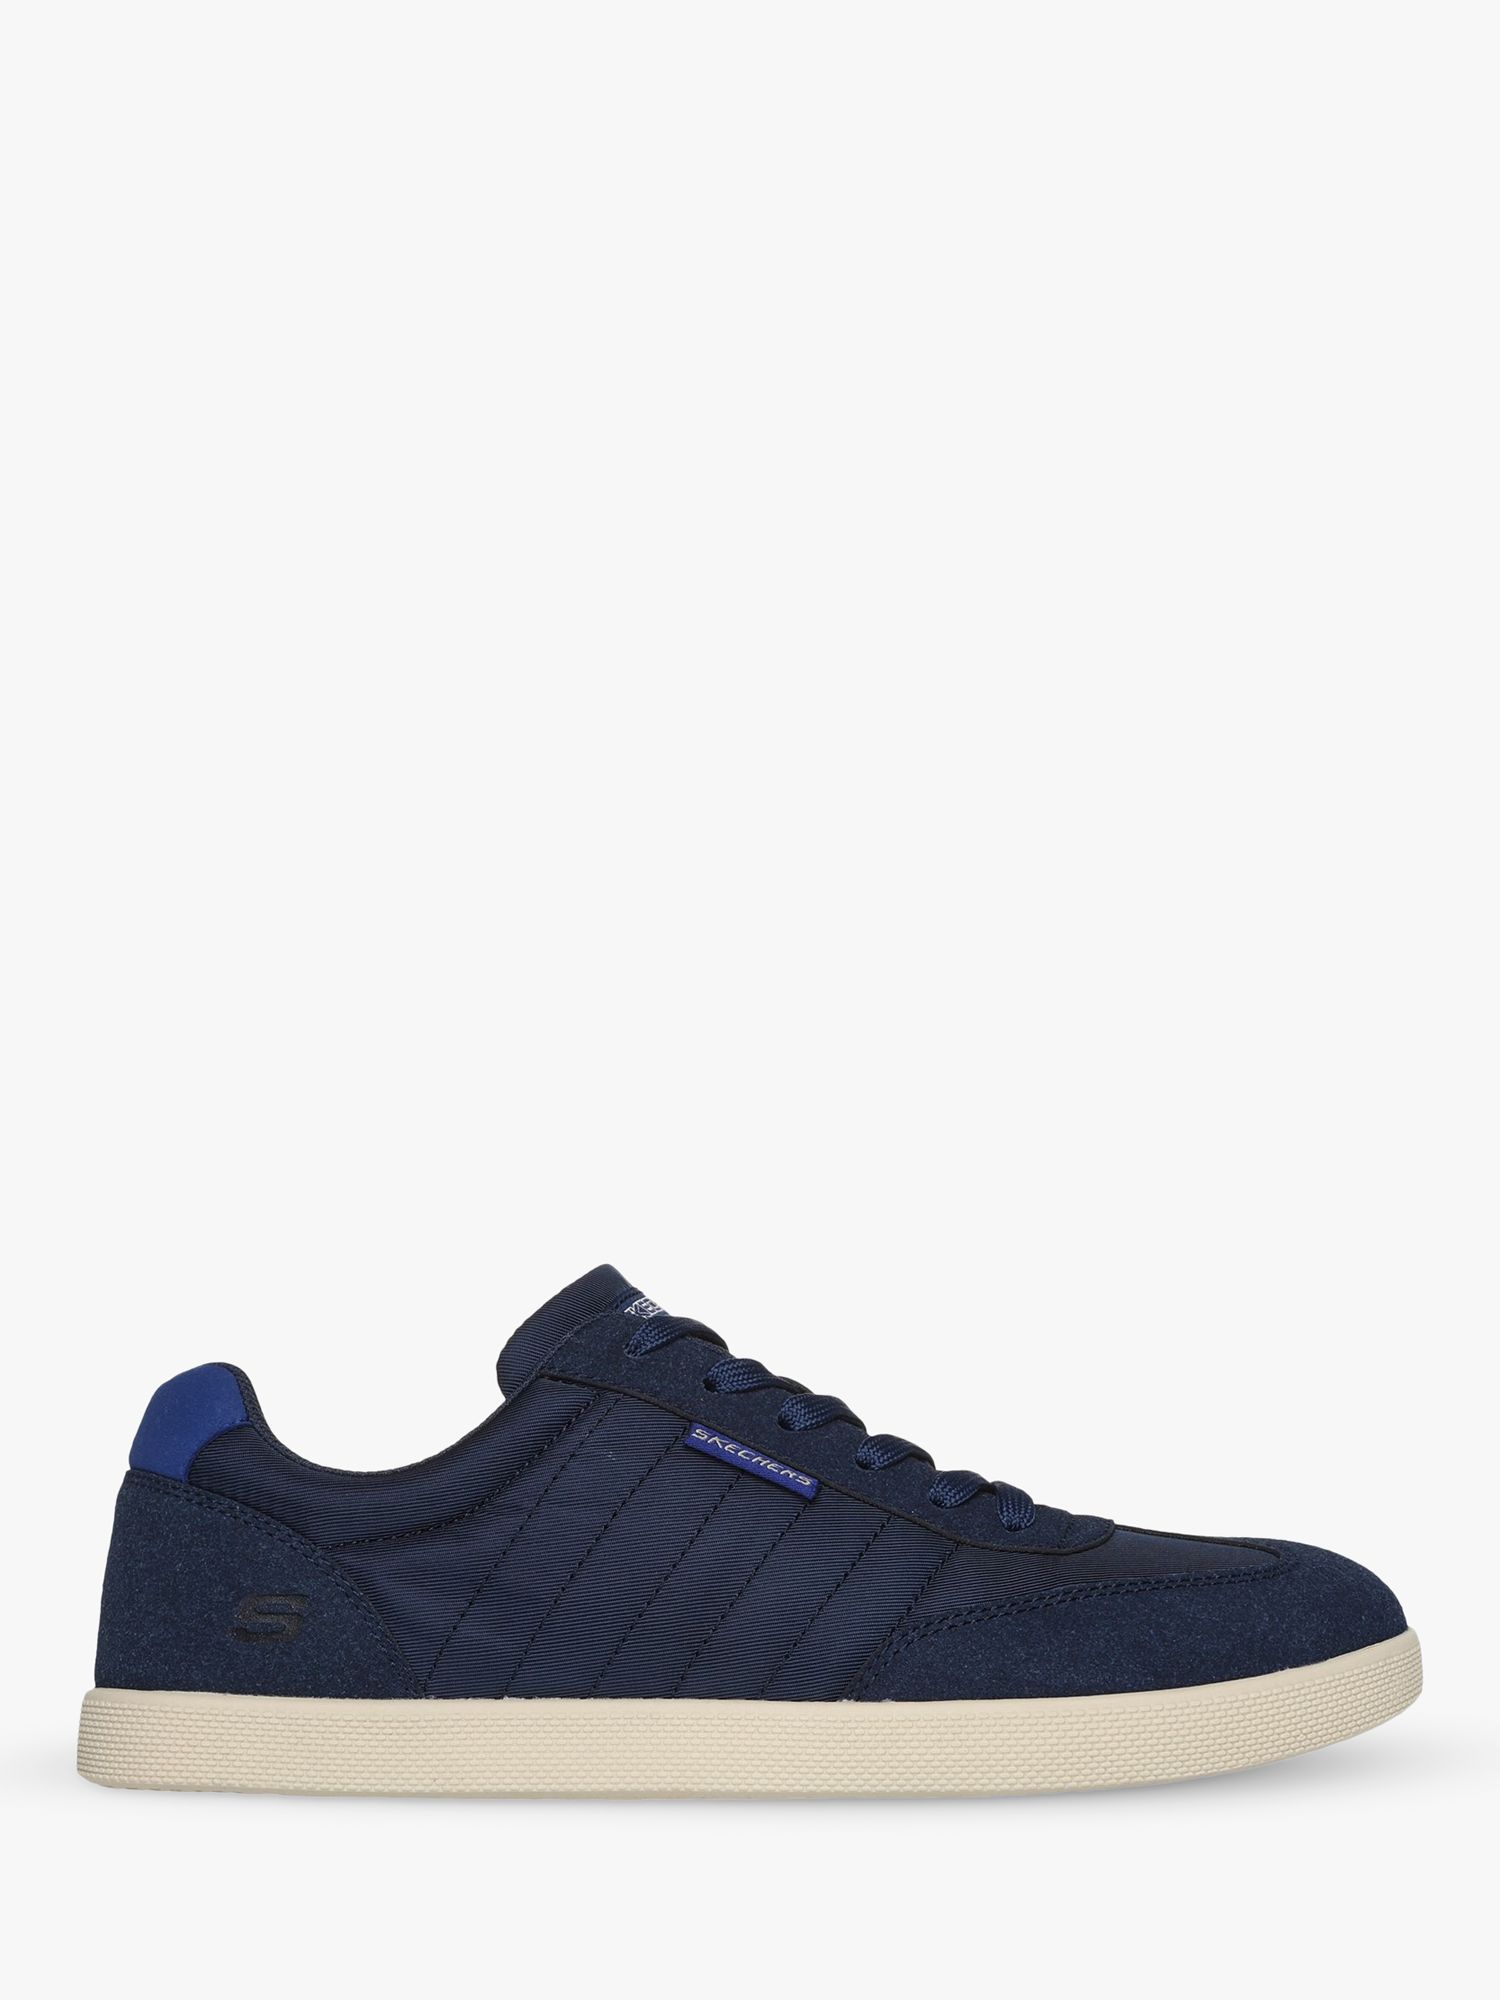 Skechers Placer Vinson Lace-Up Trainers, Navy at John Lewis & Partners